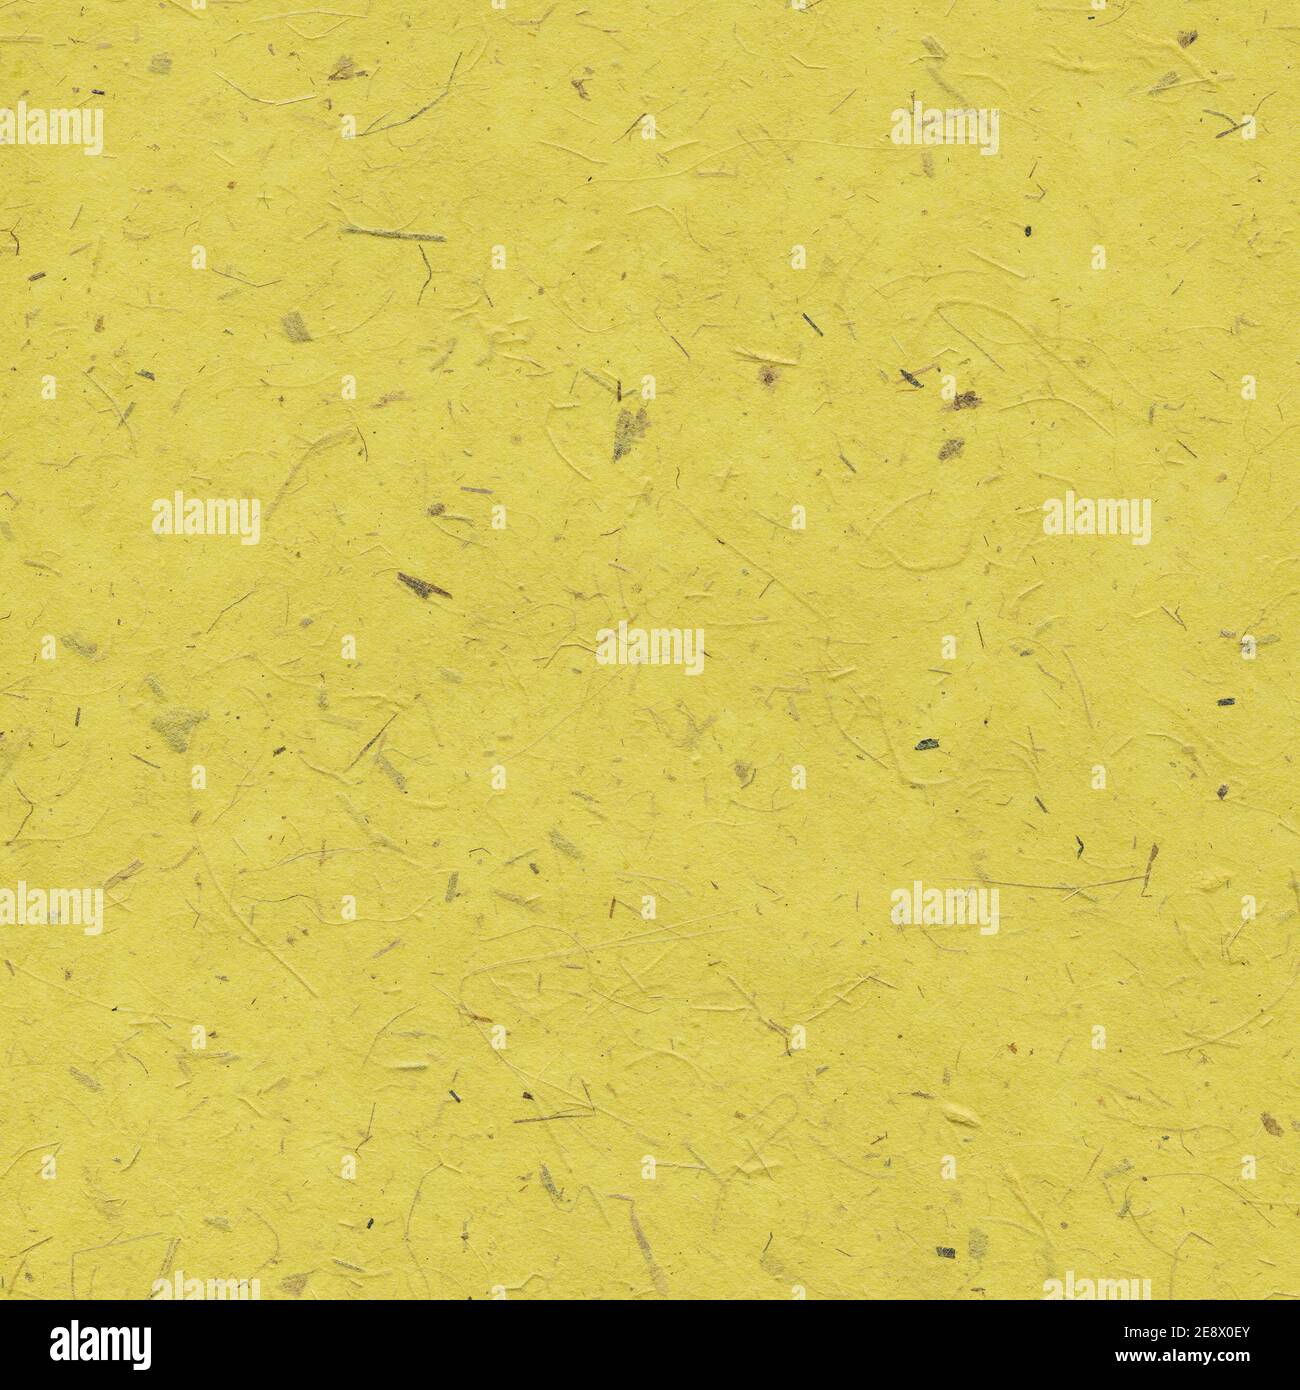 Yellow paper background with dried plants Stock Photo